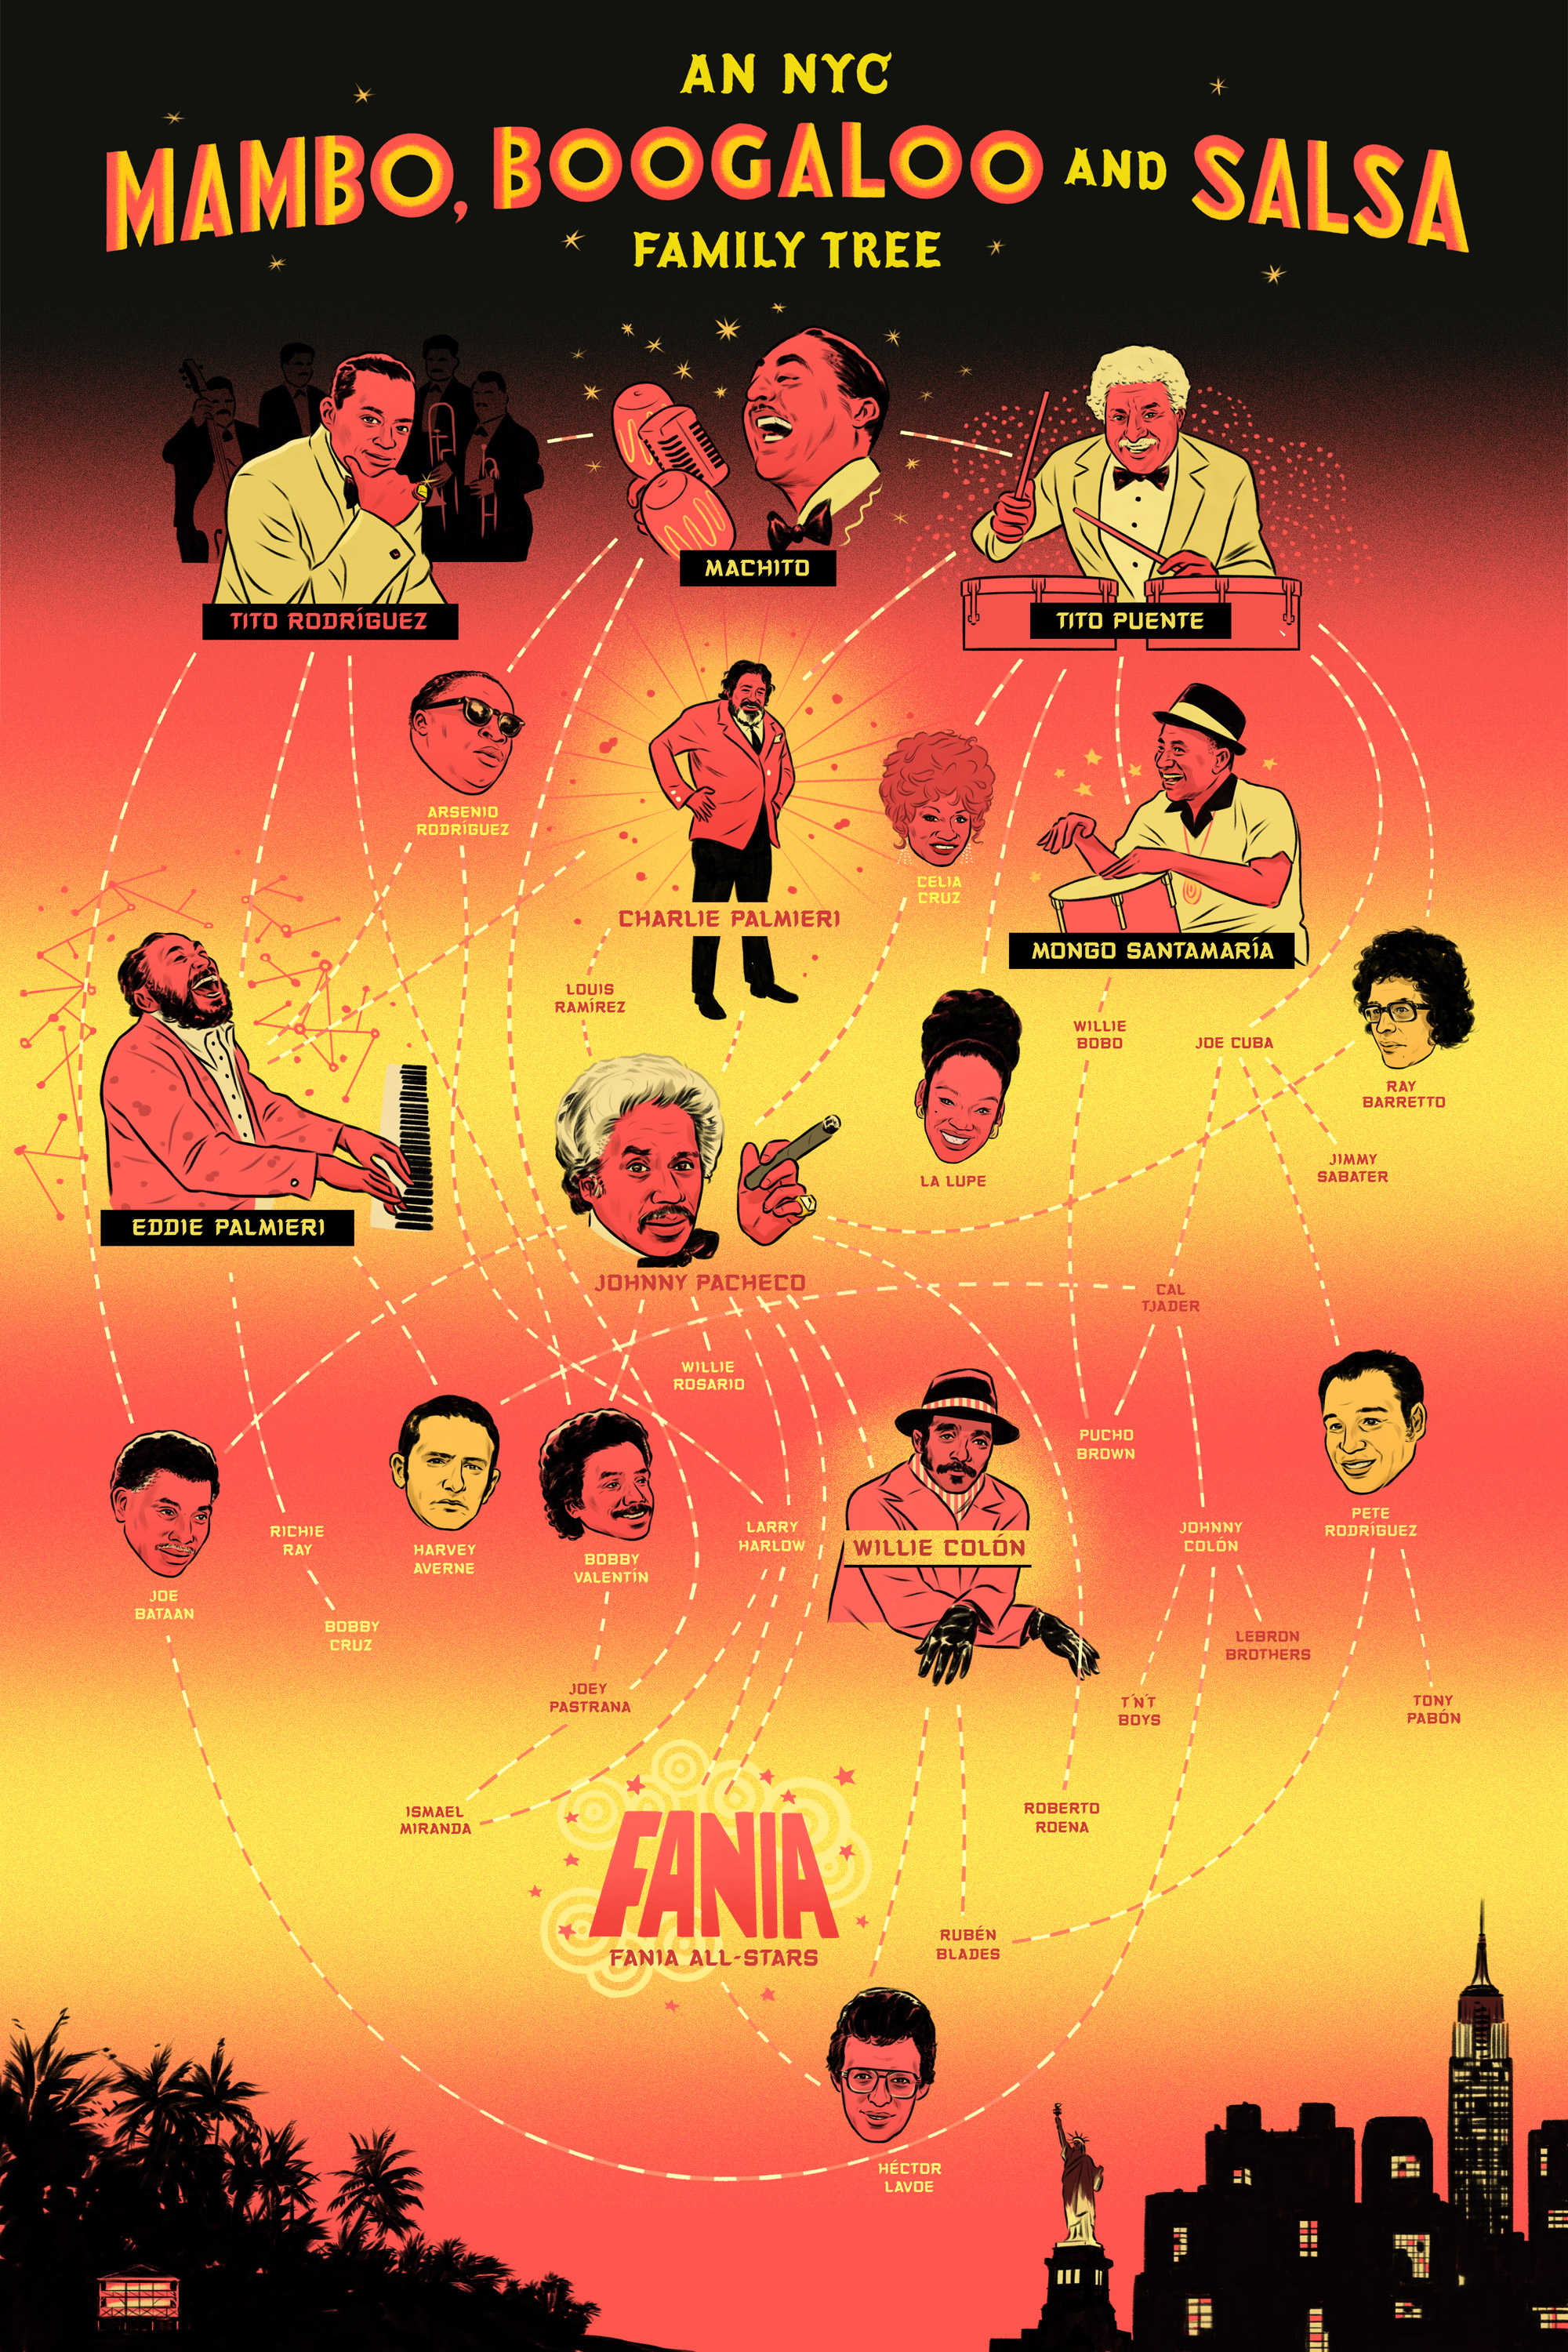 An NYC Mambo, Boogaloo and Salsa Family Tree | Red Bull Music